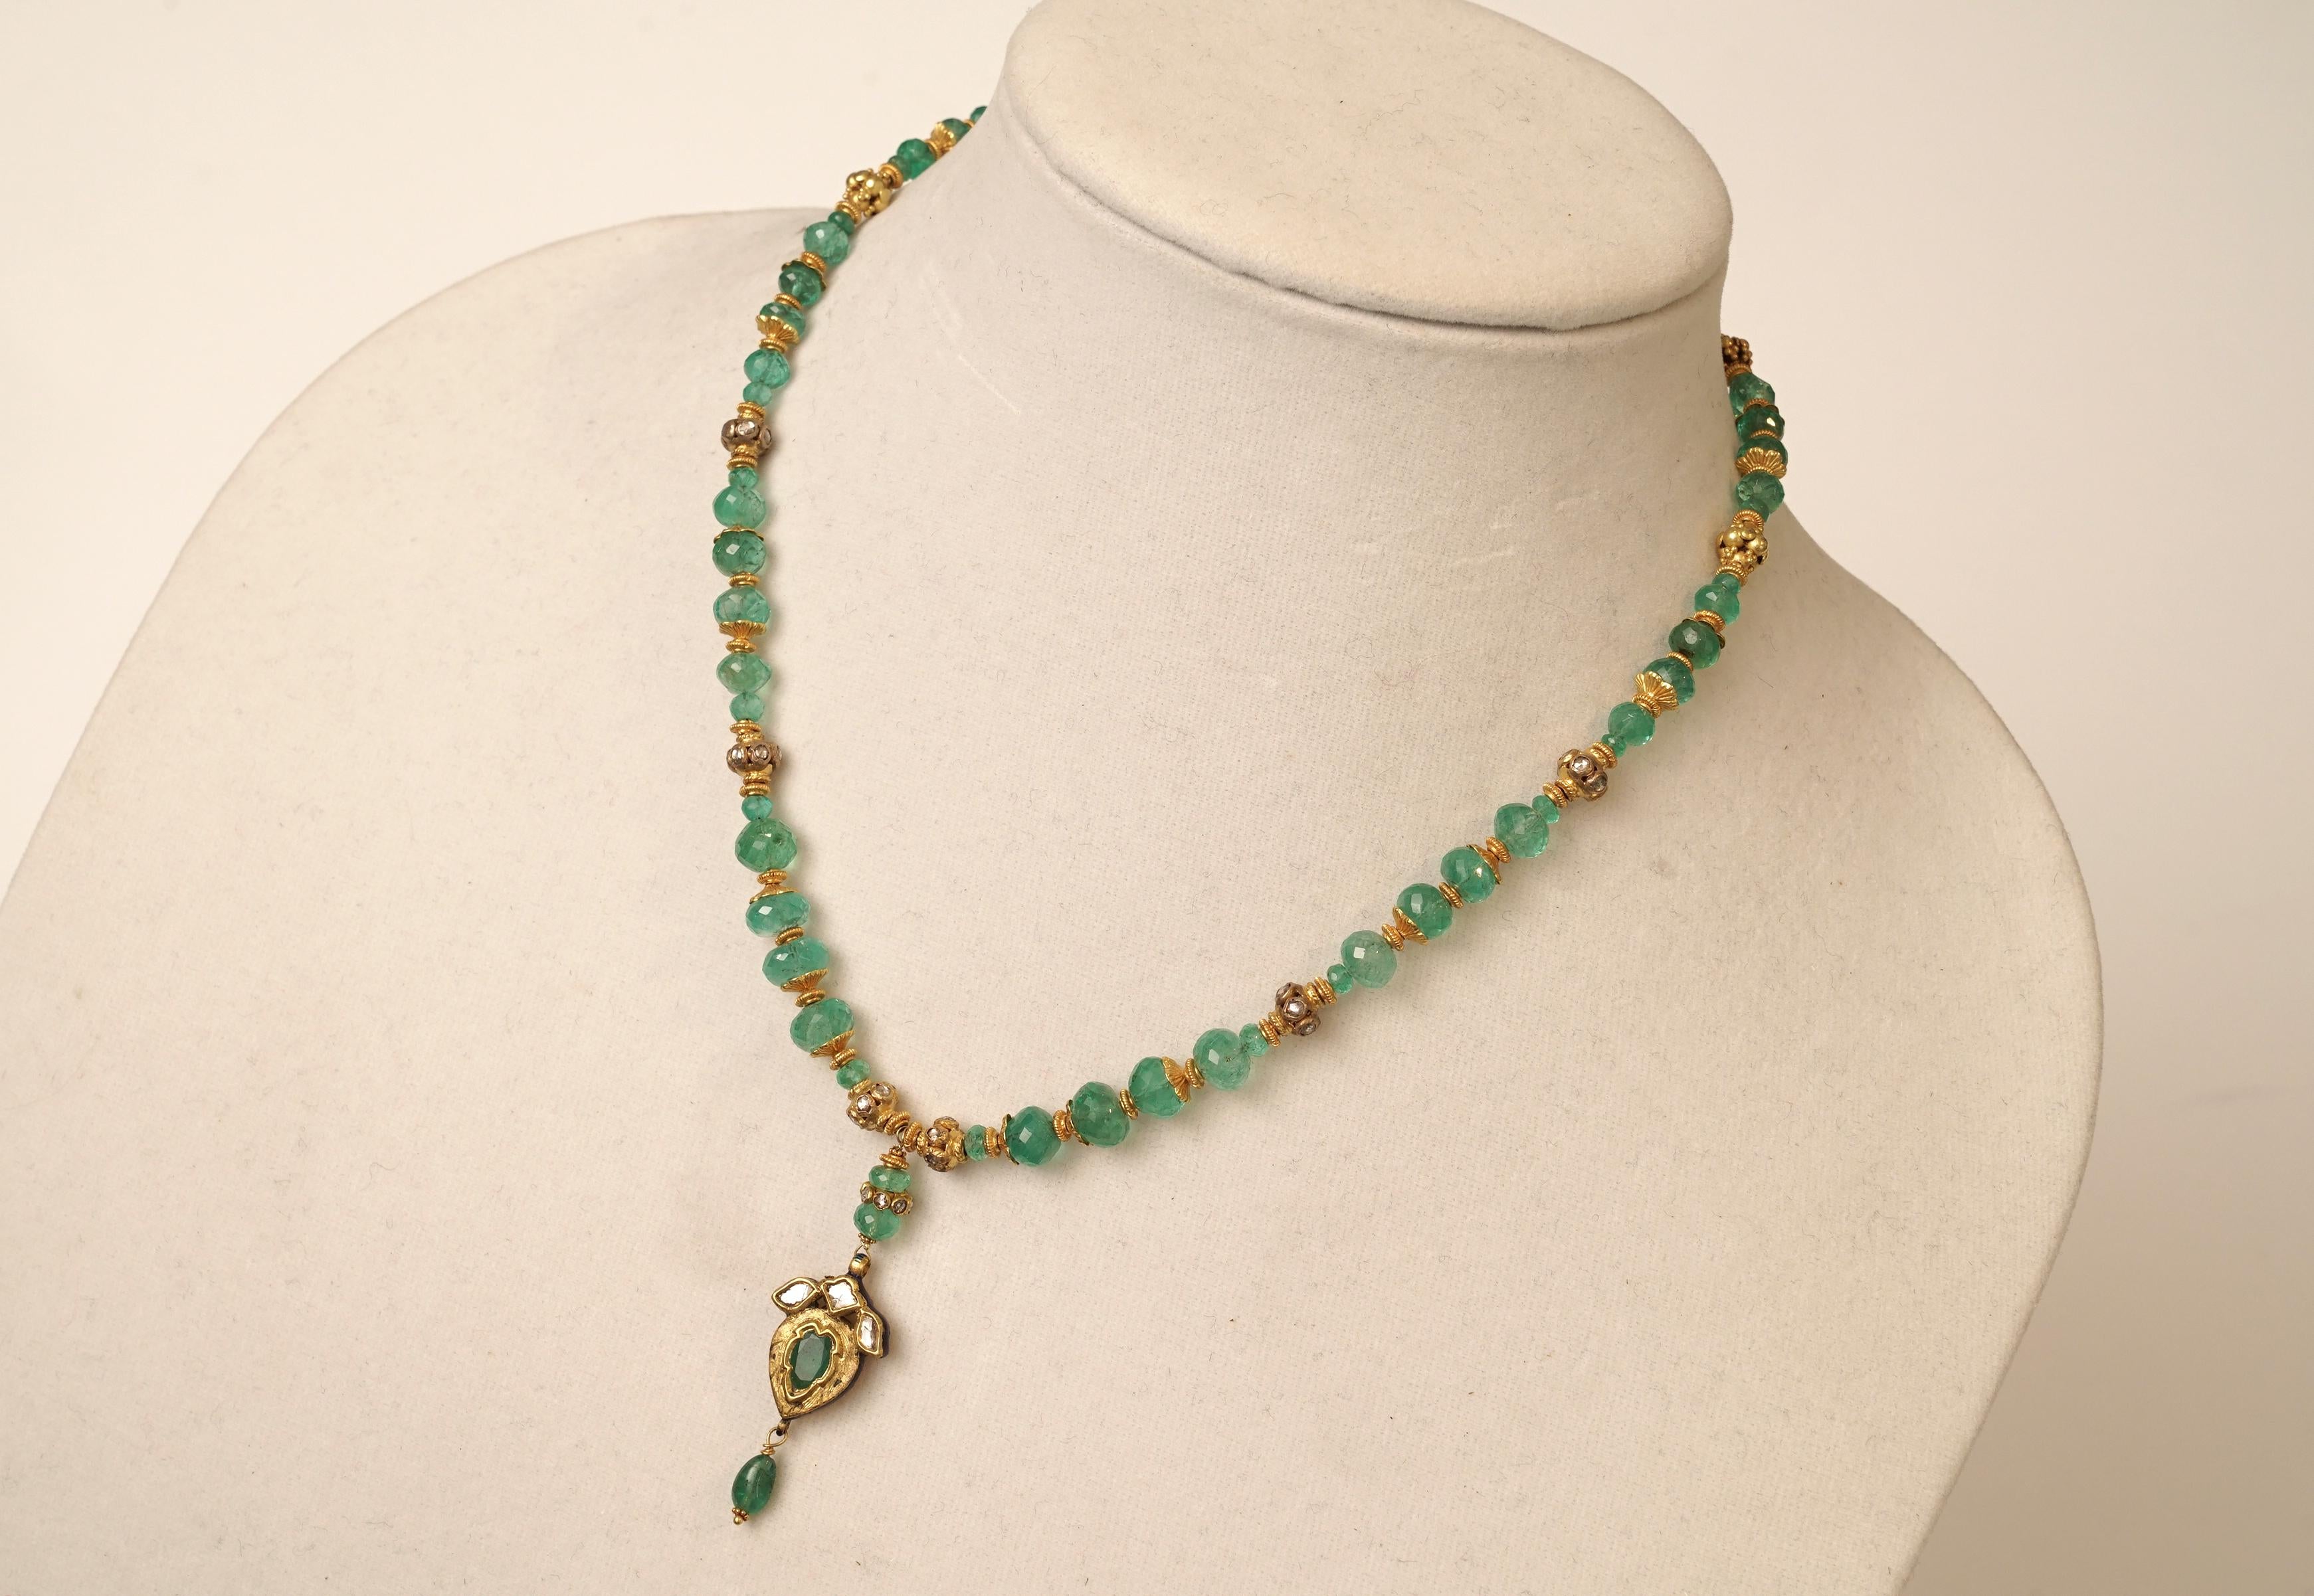 Faceted, round Columbian emerald beads with excellent clarity and color with 22K gold end caps and spacers along with 22K gold diamond rondelles.  The necklace features a long pendant with a pear-shaped, rose-cut emerald and rose-cut diamonds set in